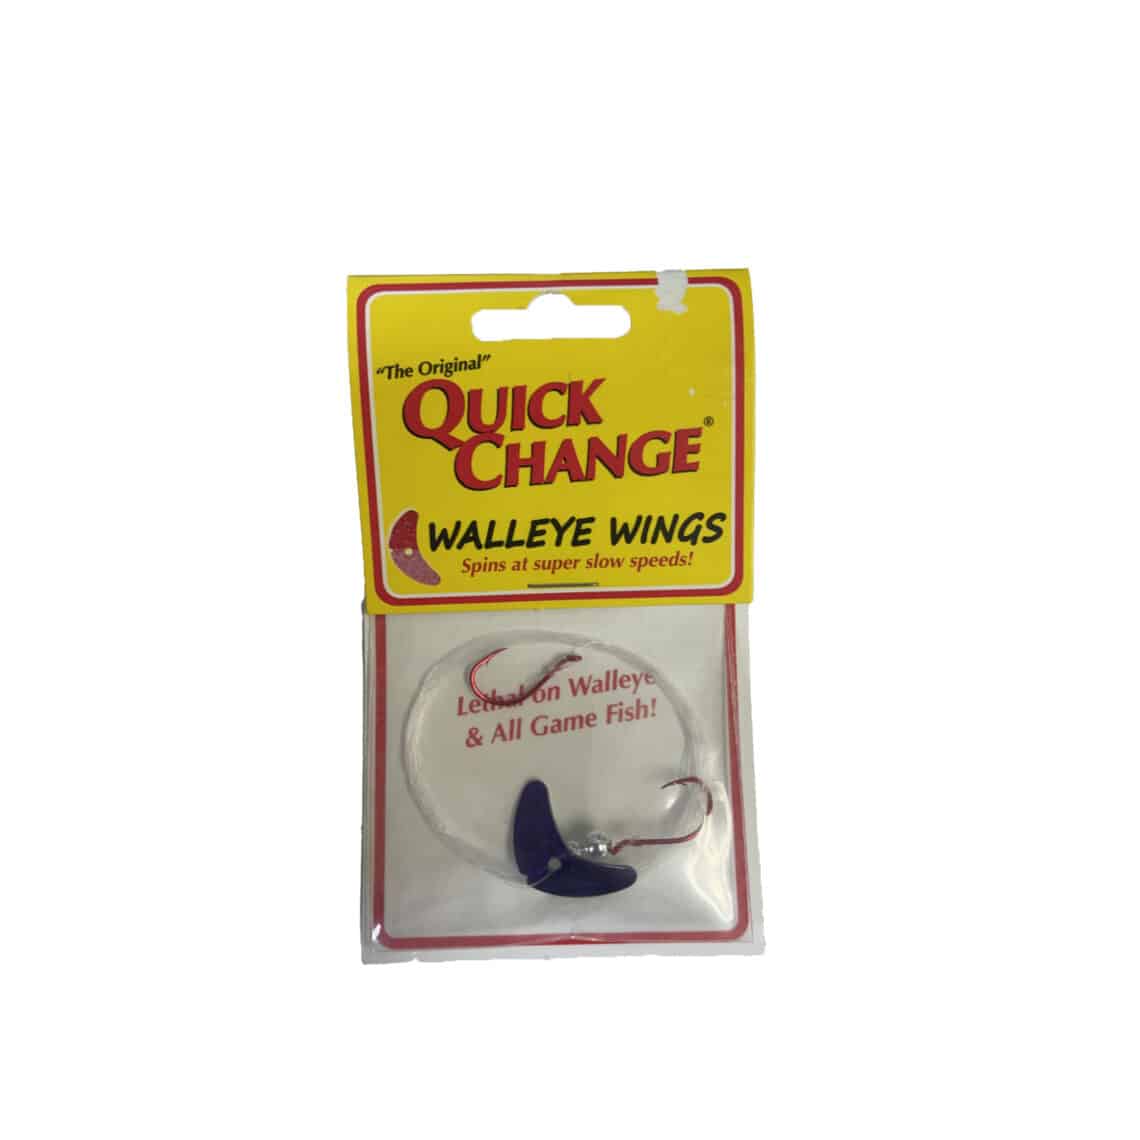 THE ORIGINAL QUICK DEATH - WALLEYE WINGS HARNESS RIG - Northwoods